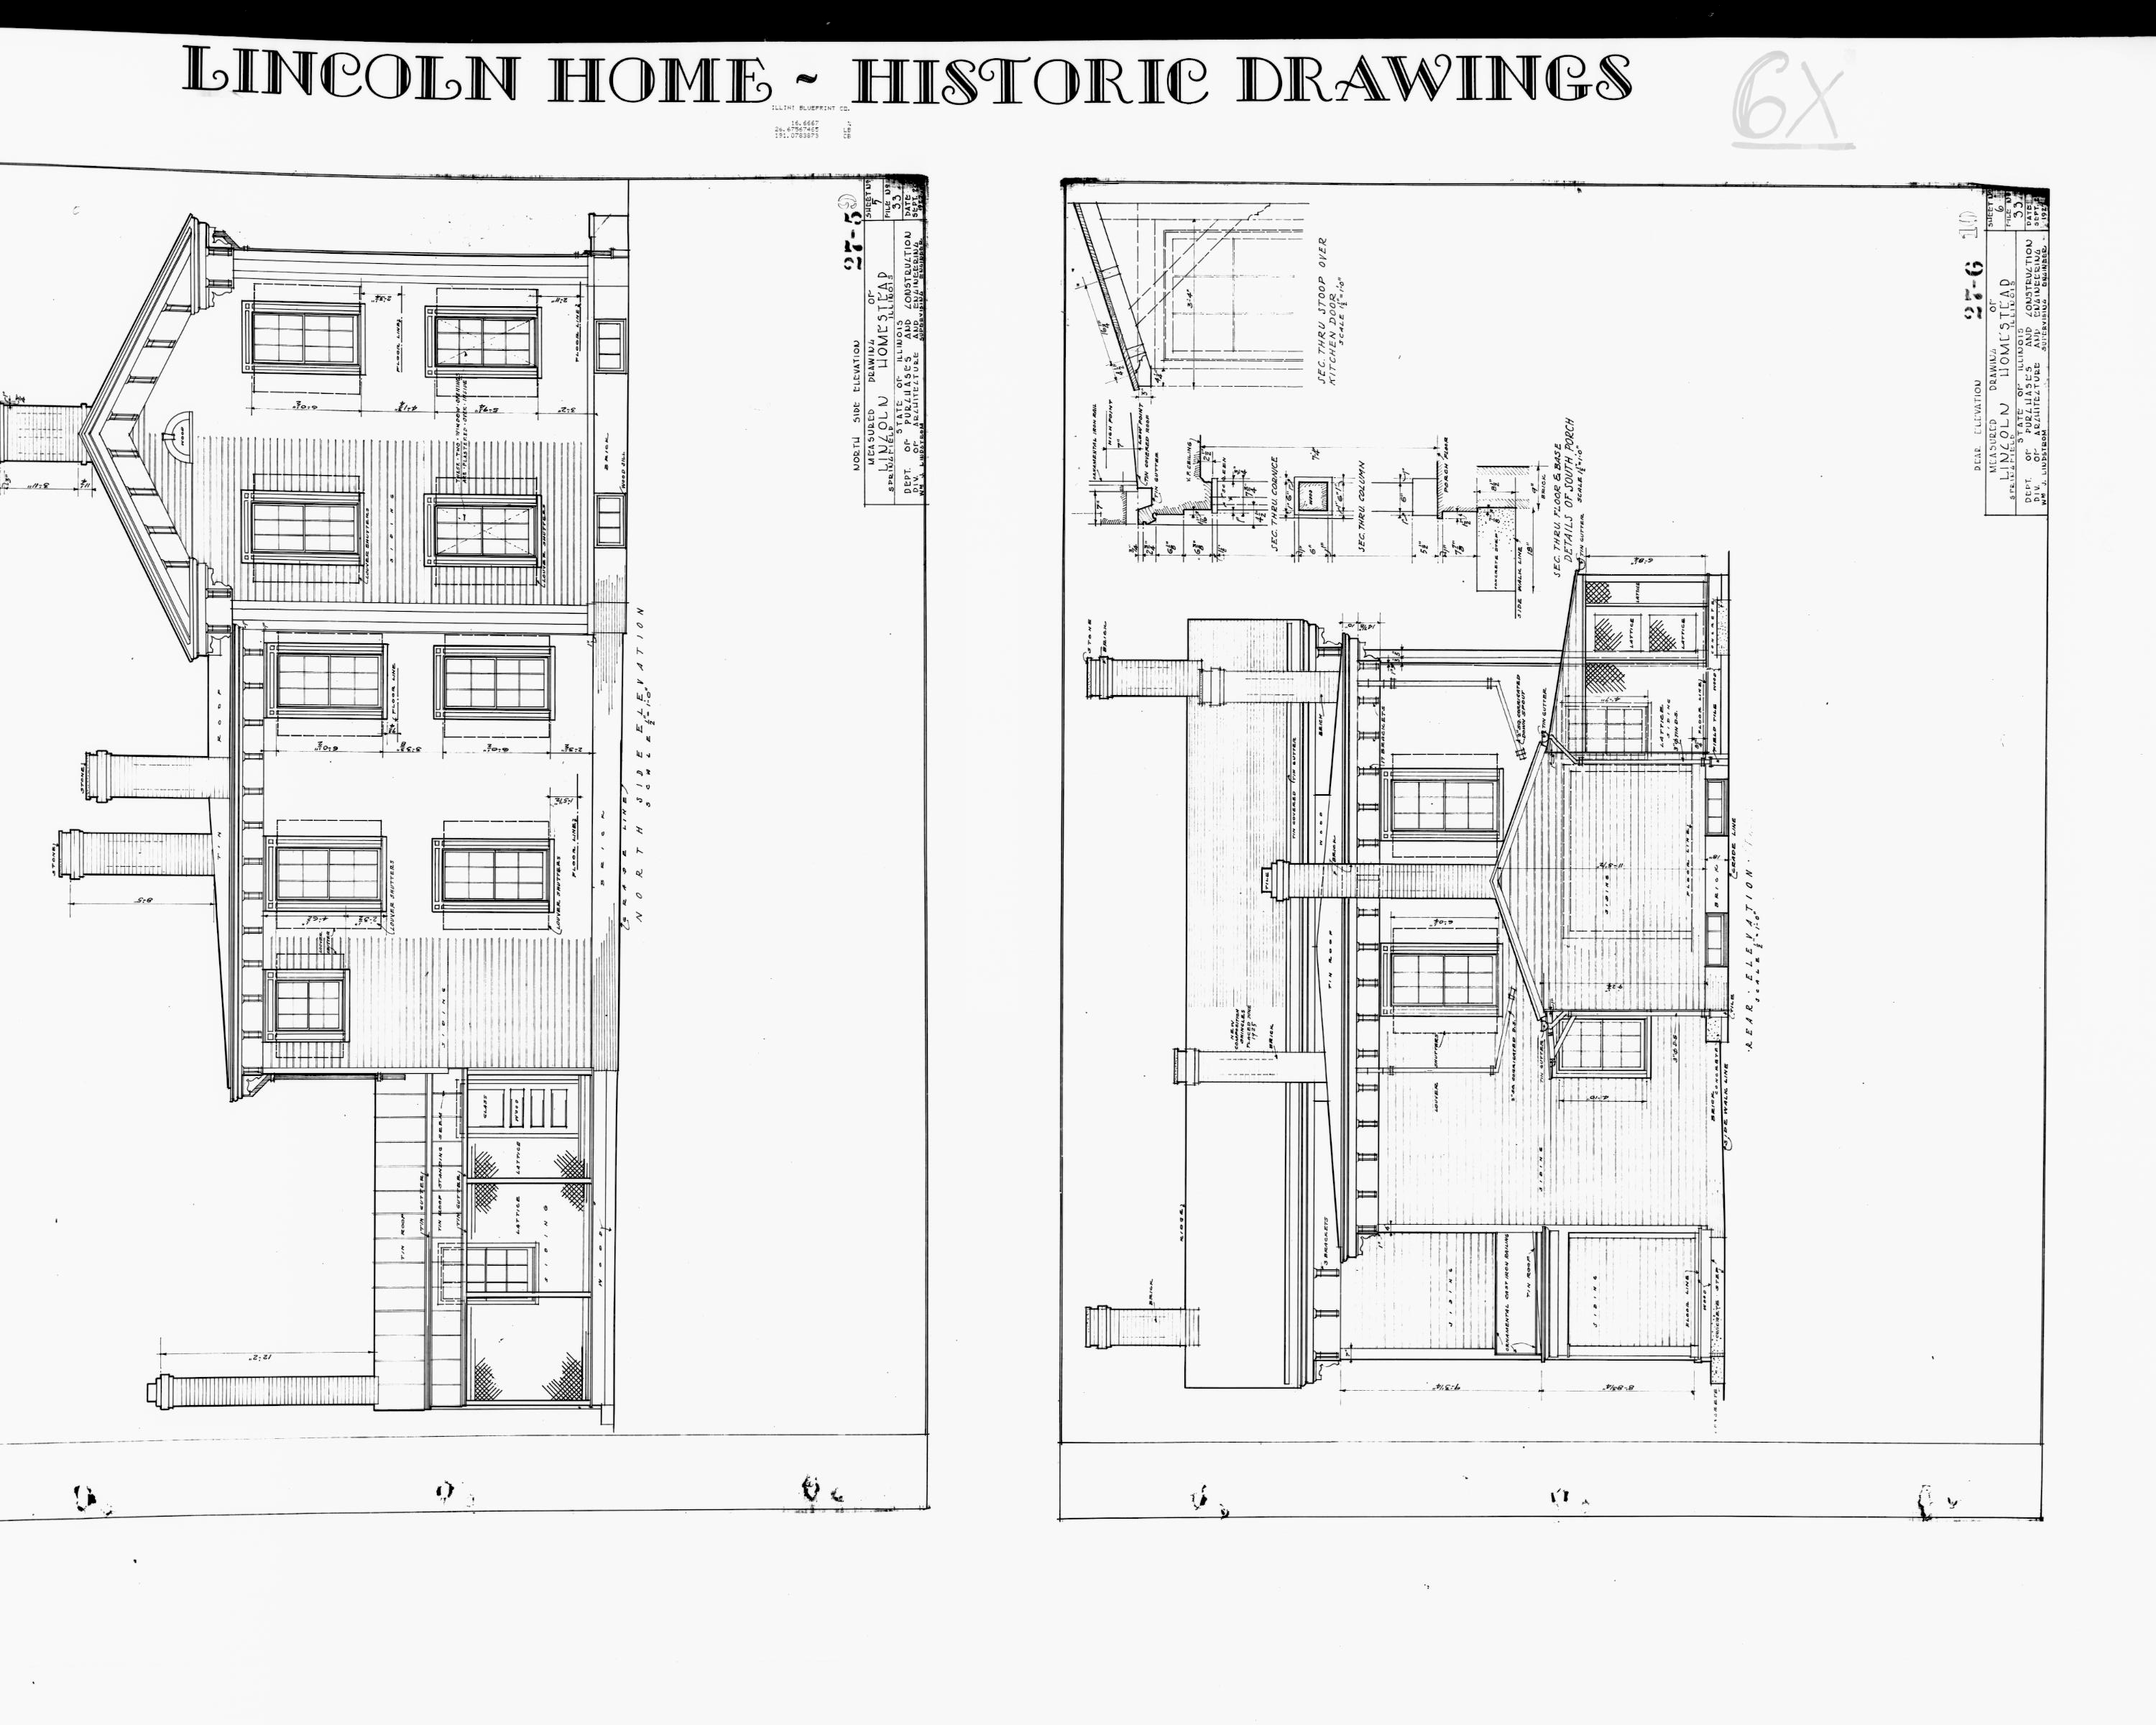 Lincoln Home - Historic Drawings 9 Lincoln, home, historic drawings, north elevation, east elevation